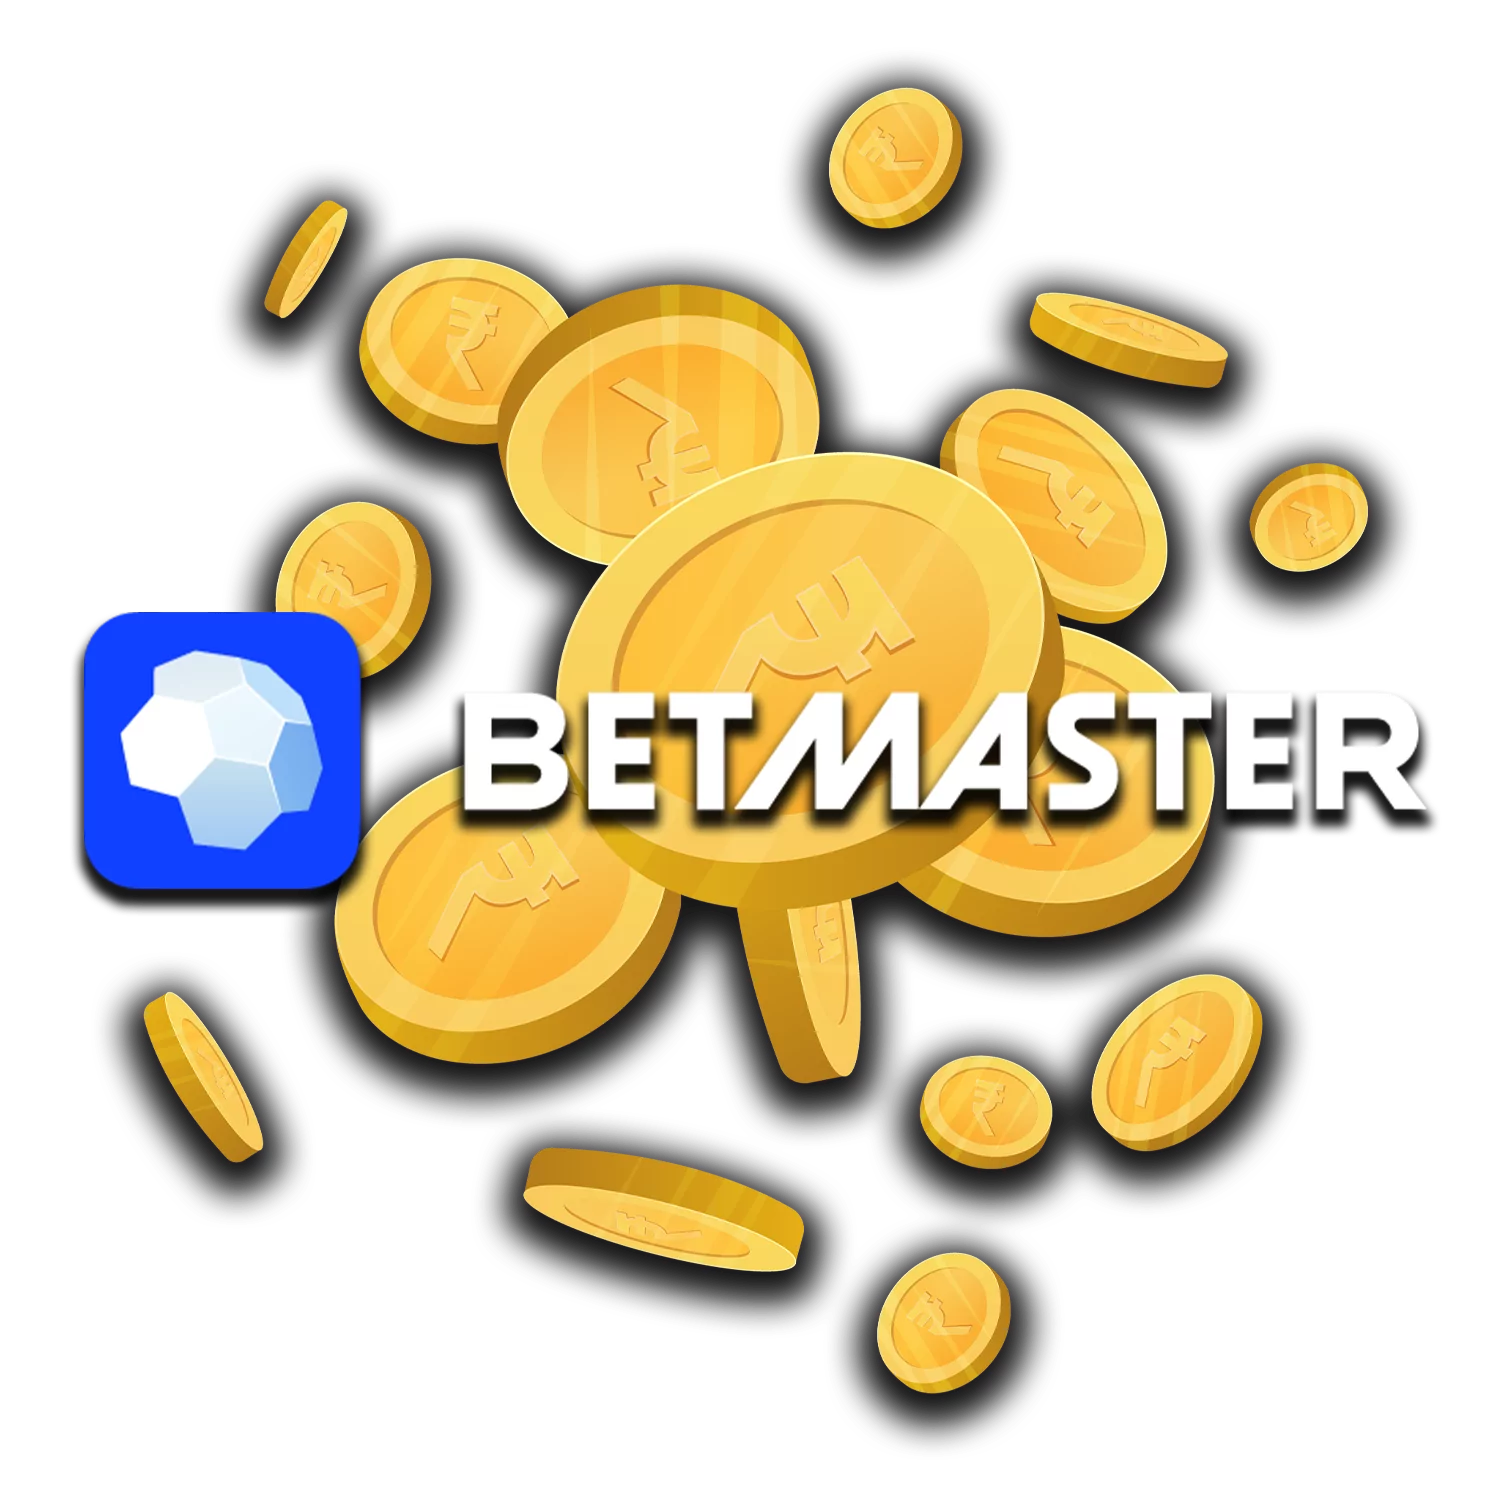 Betmaster has a pack of bonuses anf promotions for Indian bettors.